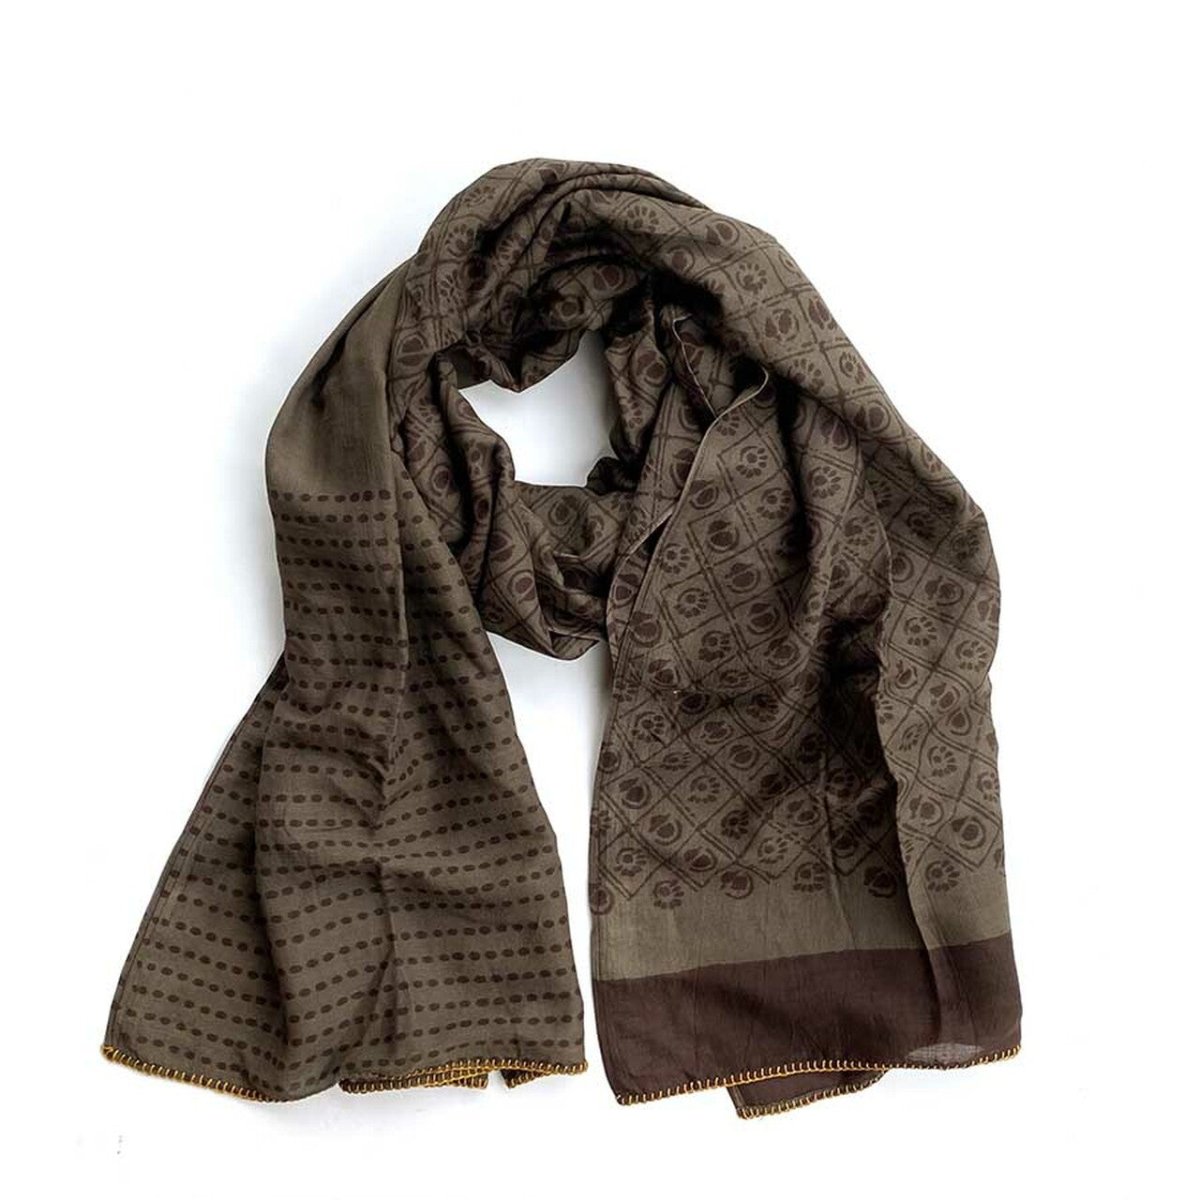 Deep brown scarf with block printed pattern and golden thread hemmed edge. Designed by Ichcha and handmade in India.